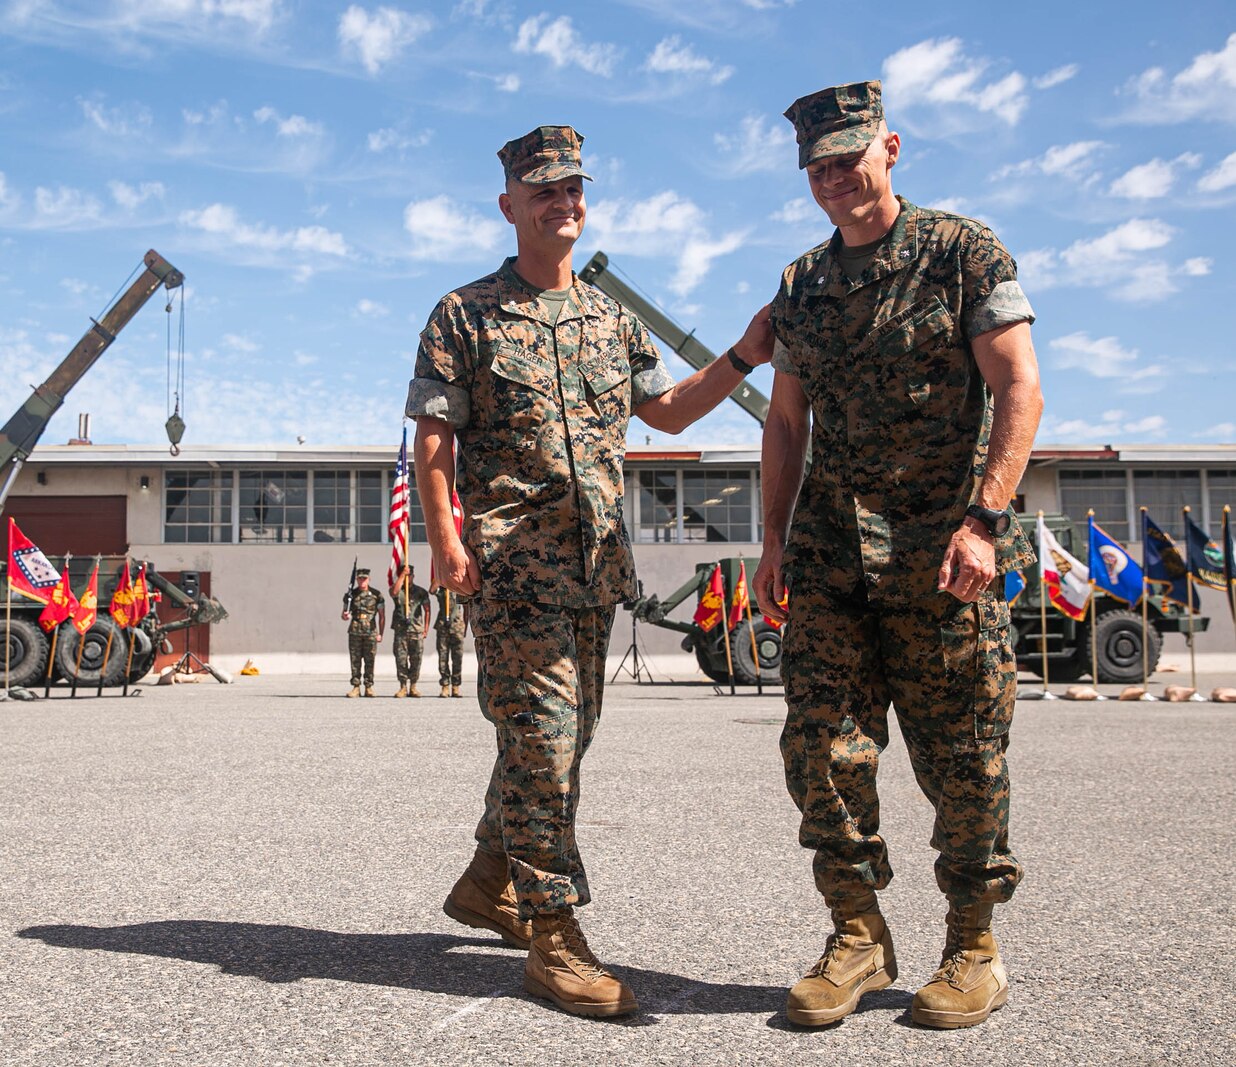 U.S. Marine Corps Lt. Col. Matt Hager, outgoing commanding officer, left, 1st Maintenance Battalion, and incoming commanding officer Lt. Col. Joseph R. Petkus, right, embrace after exchanging the Battalion colors.